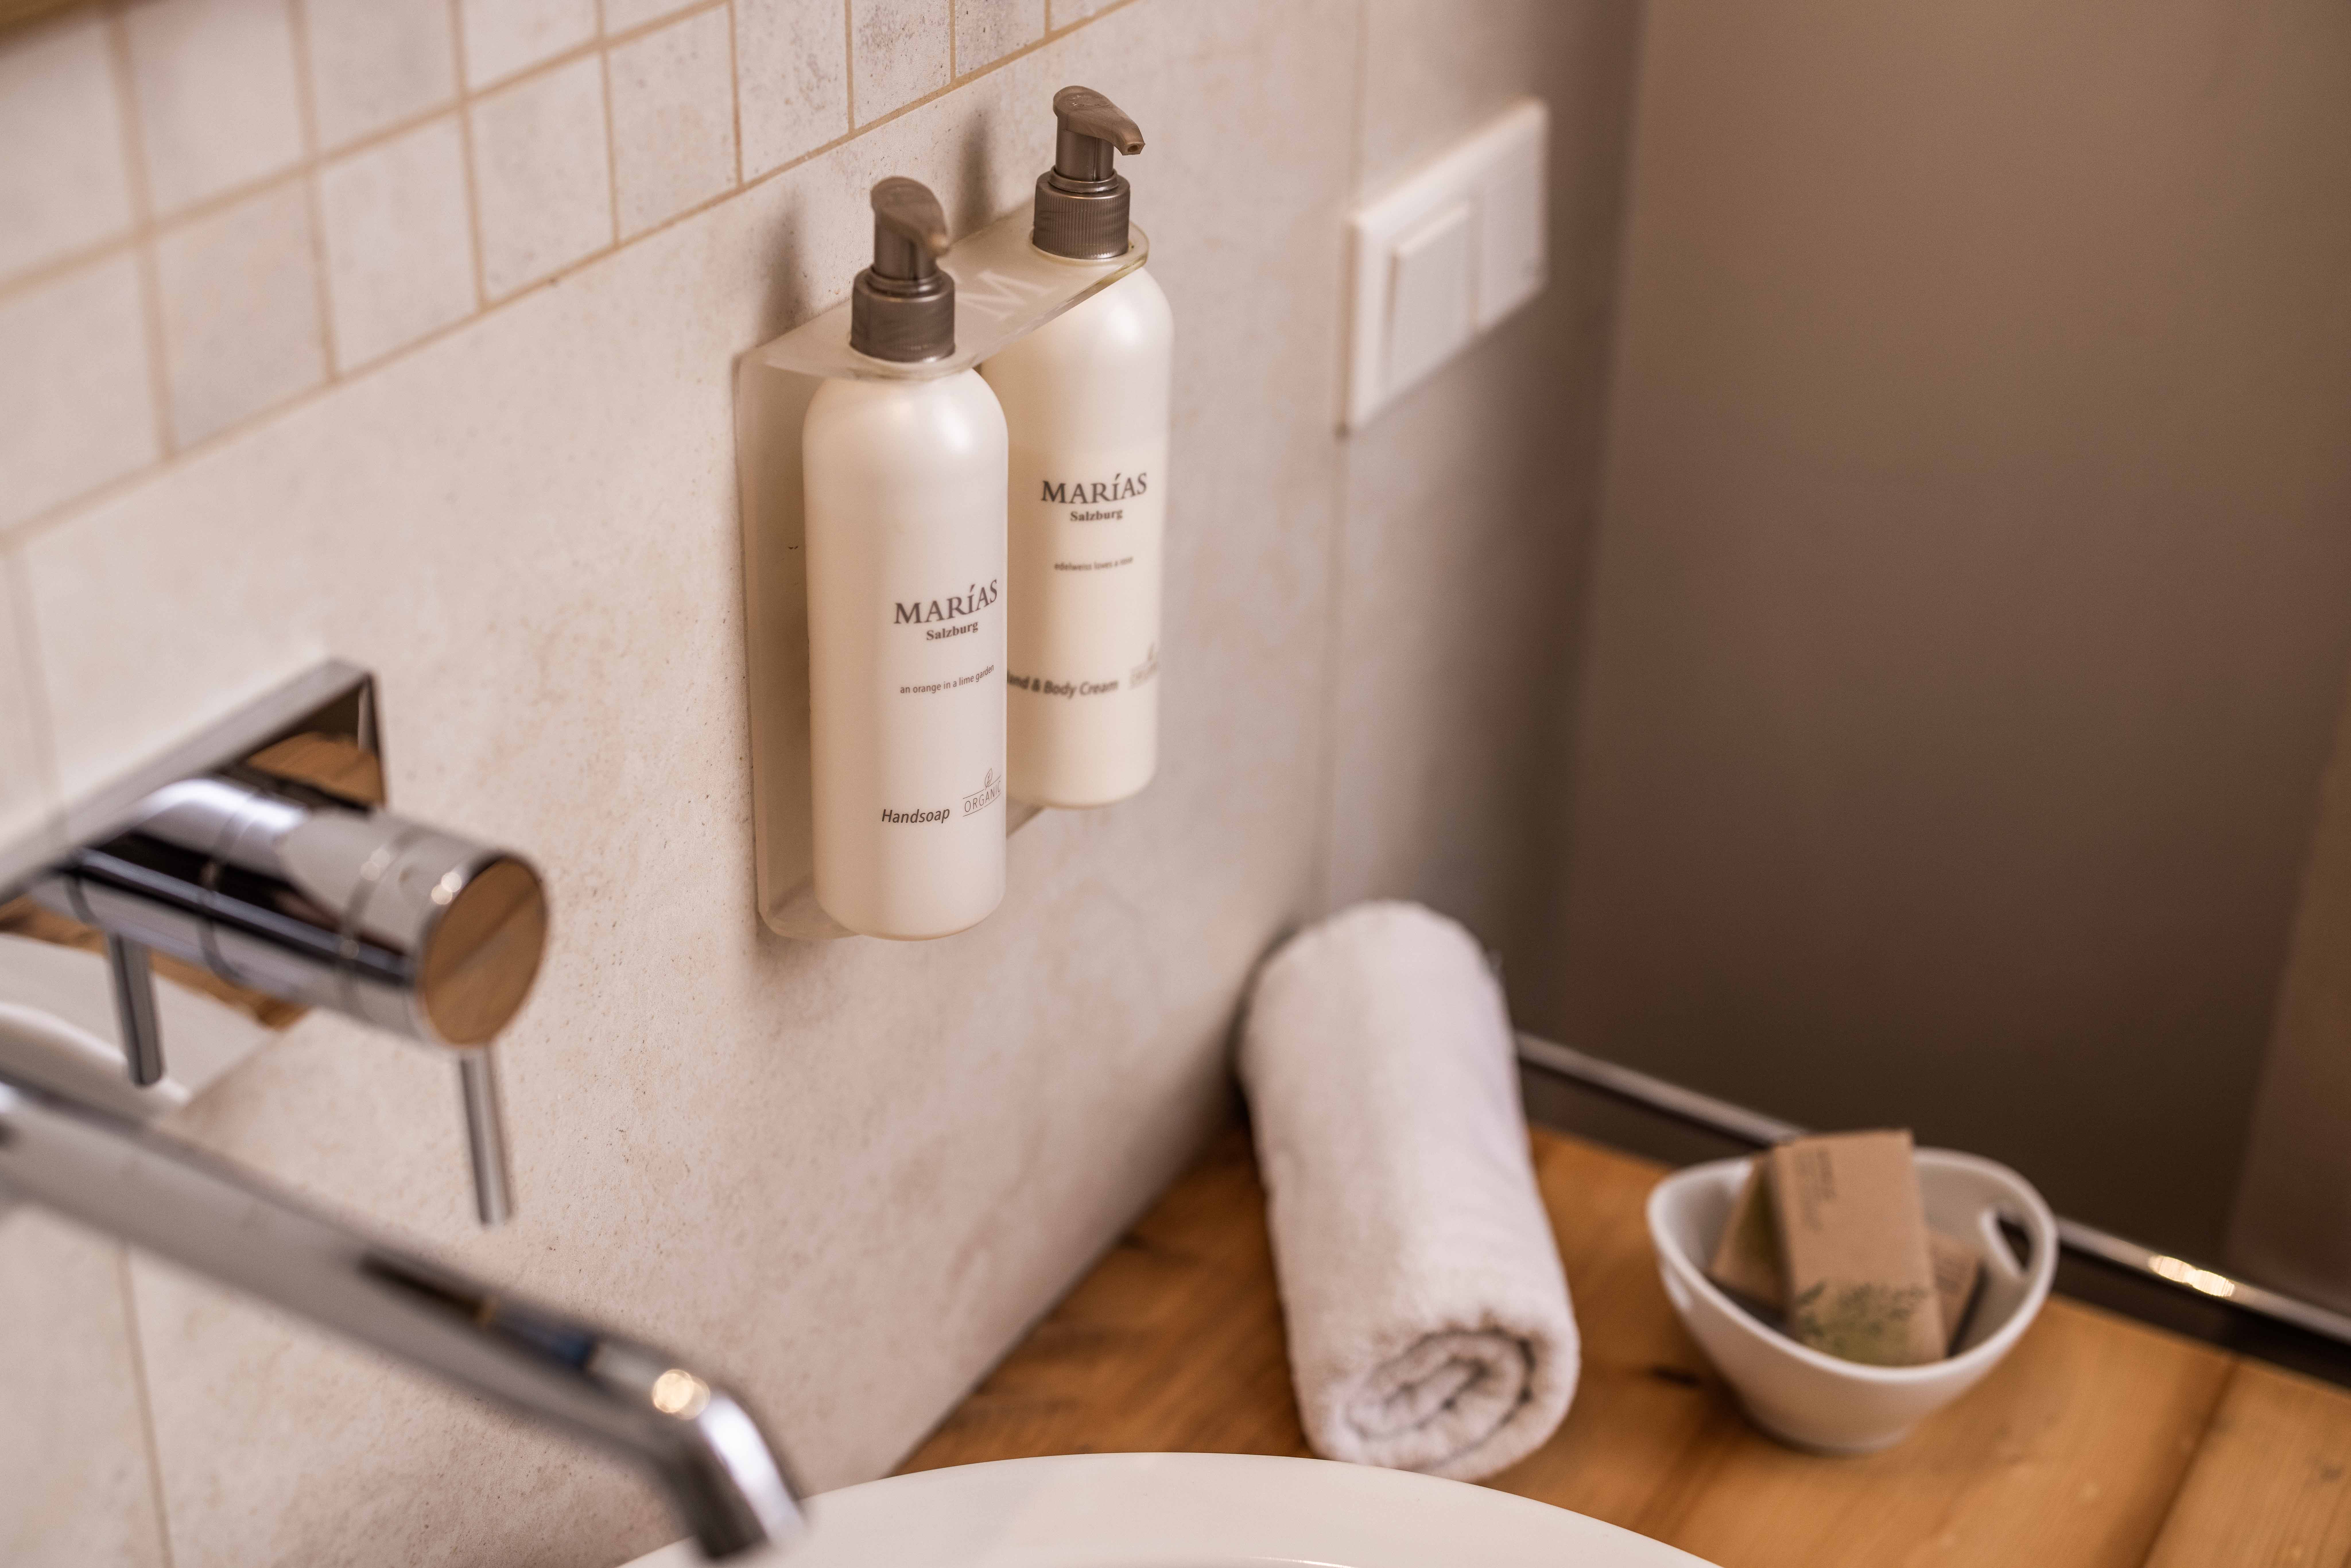 Soap dispenser of high-quality organic cosmetics by Maria Pieper on the wall bracket in the bathroom